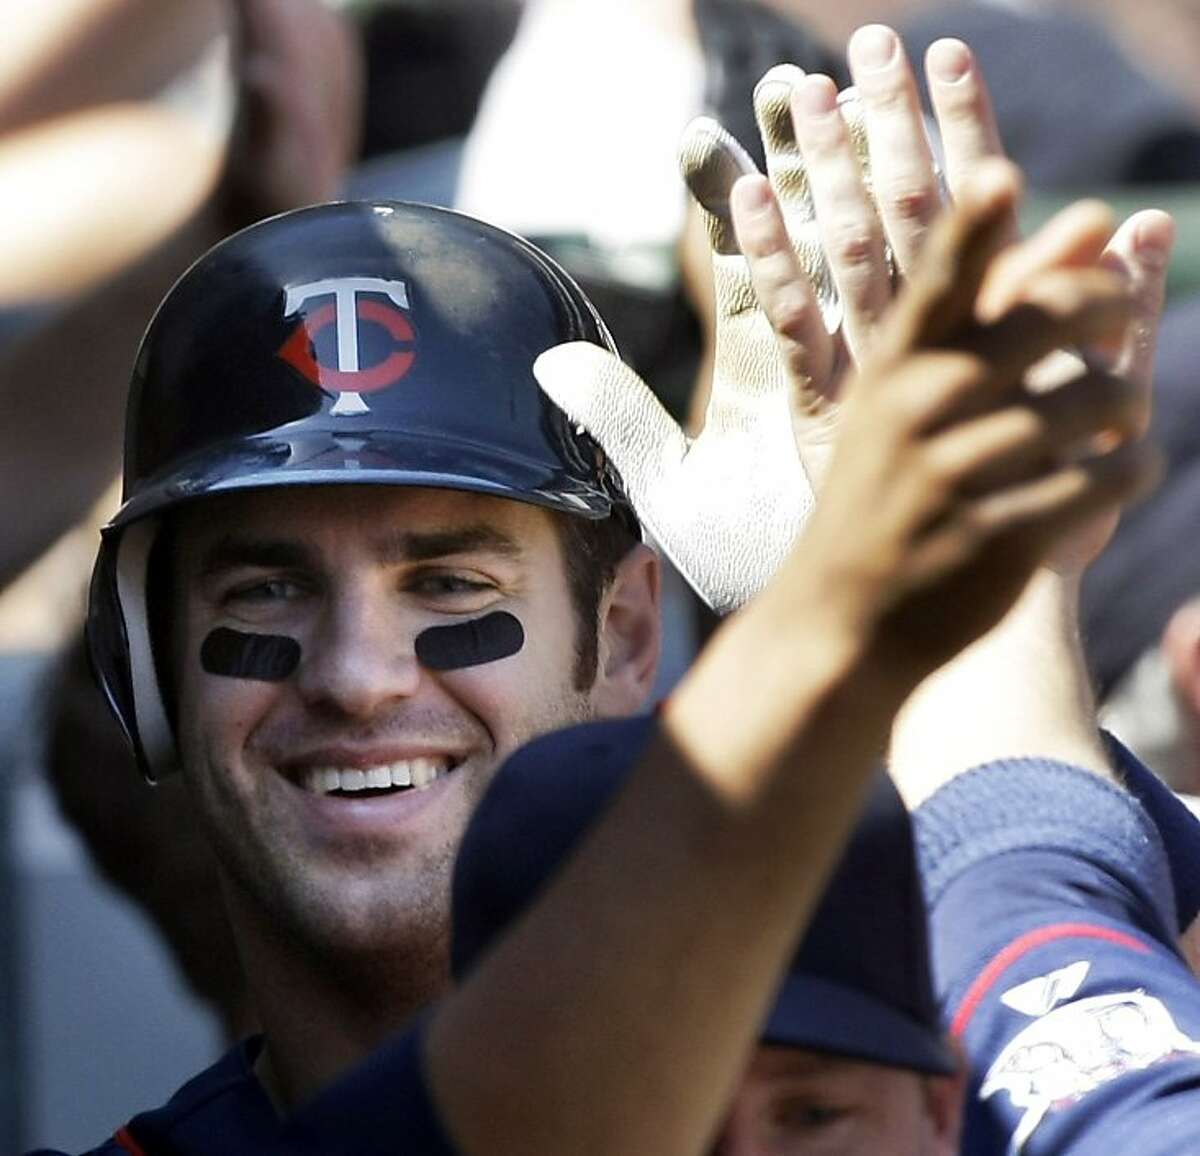 Minnesota Twins' Joe Mauer is congratulated in the the dugout after hitting a grand slam during the sixth inning of a baseball game against the Chicago White Sox in Chicago, Thursday, May 21, 2009. (AP Photo/Charles Rex Arbogast)